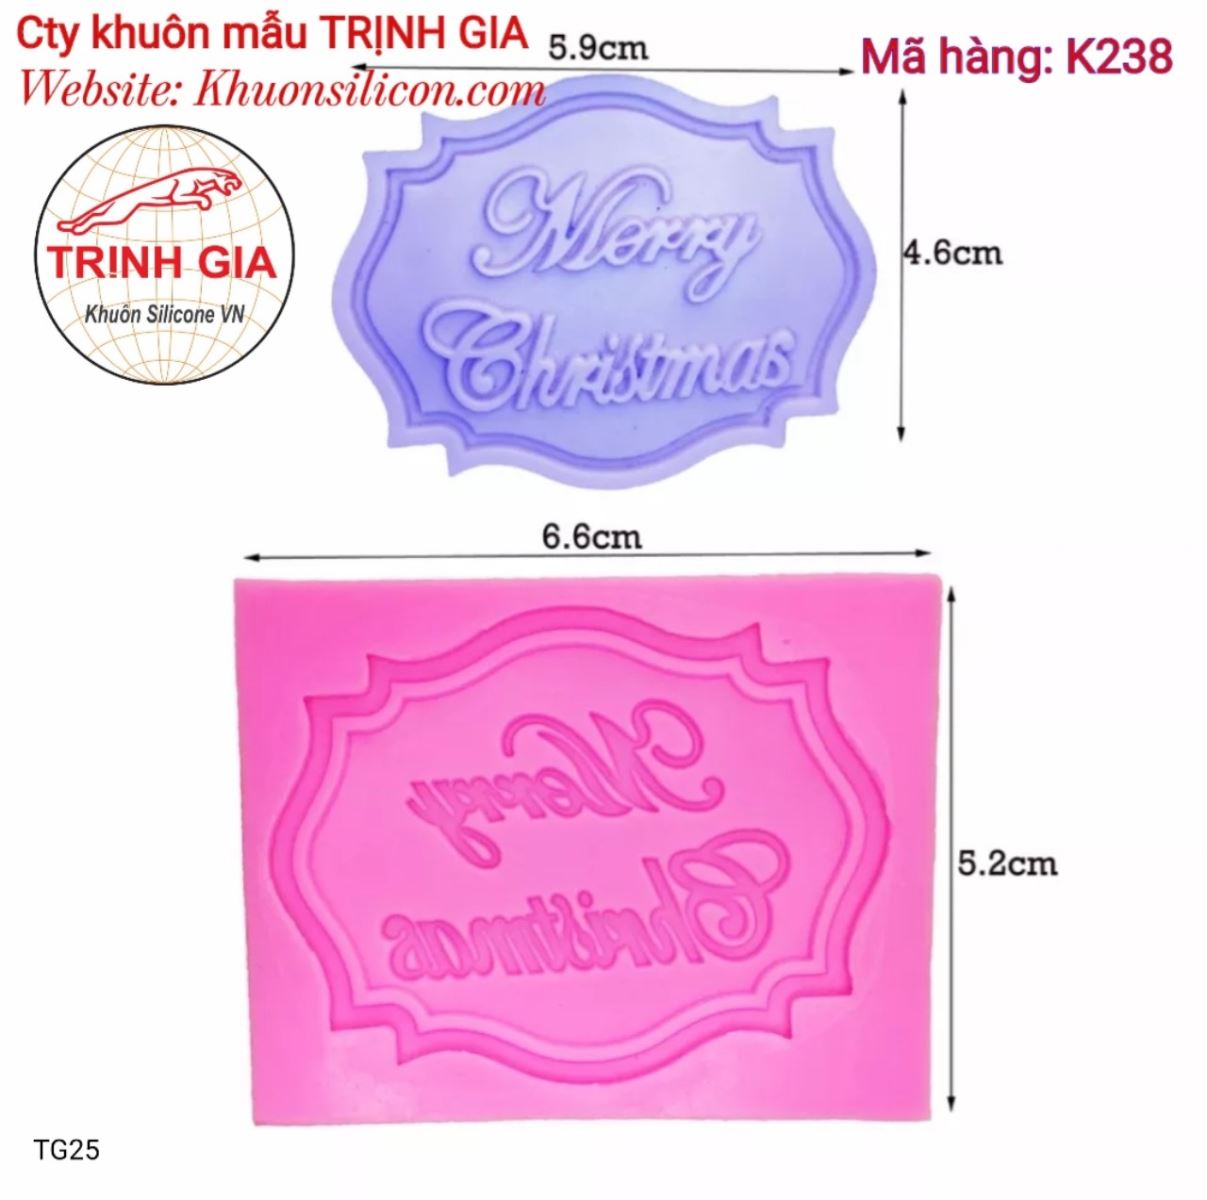 khuôn silicone Chữ Merry Christmas